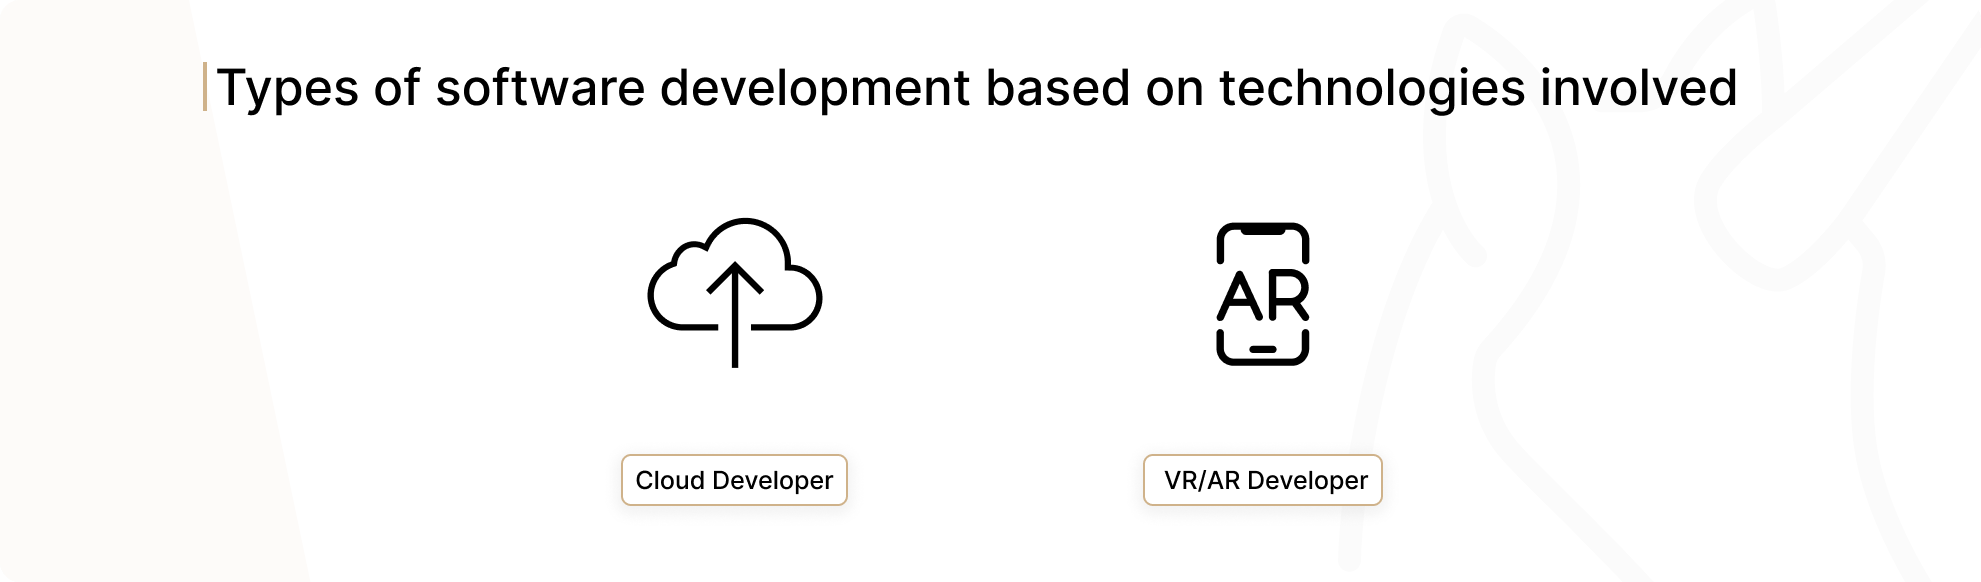 Types of Software Developers Based On Technologies Involved